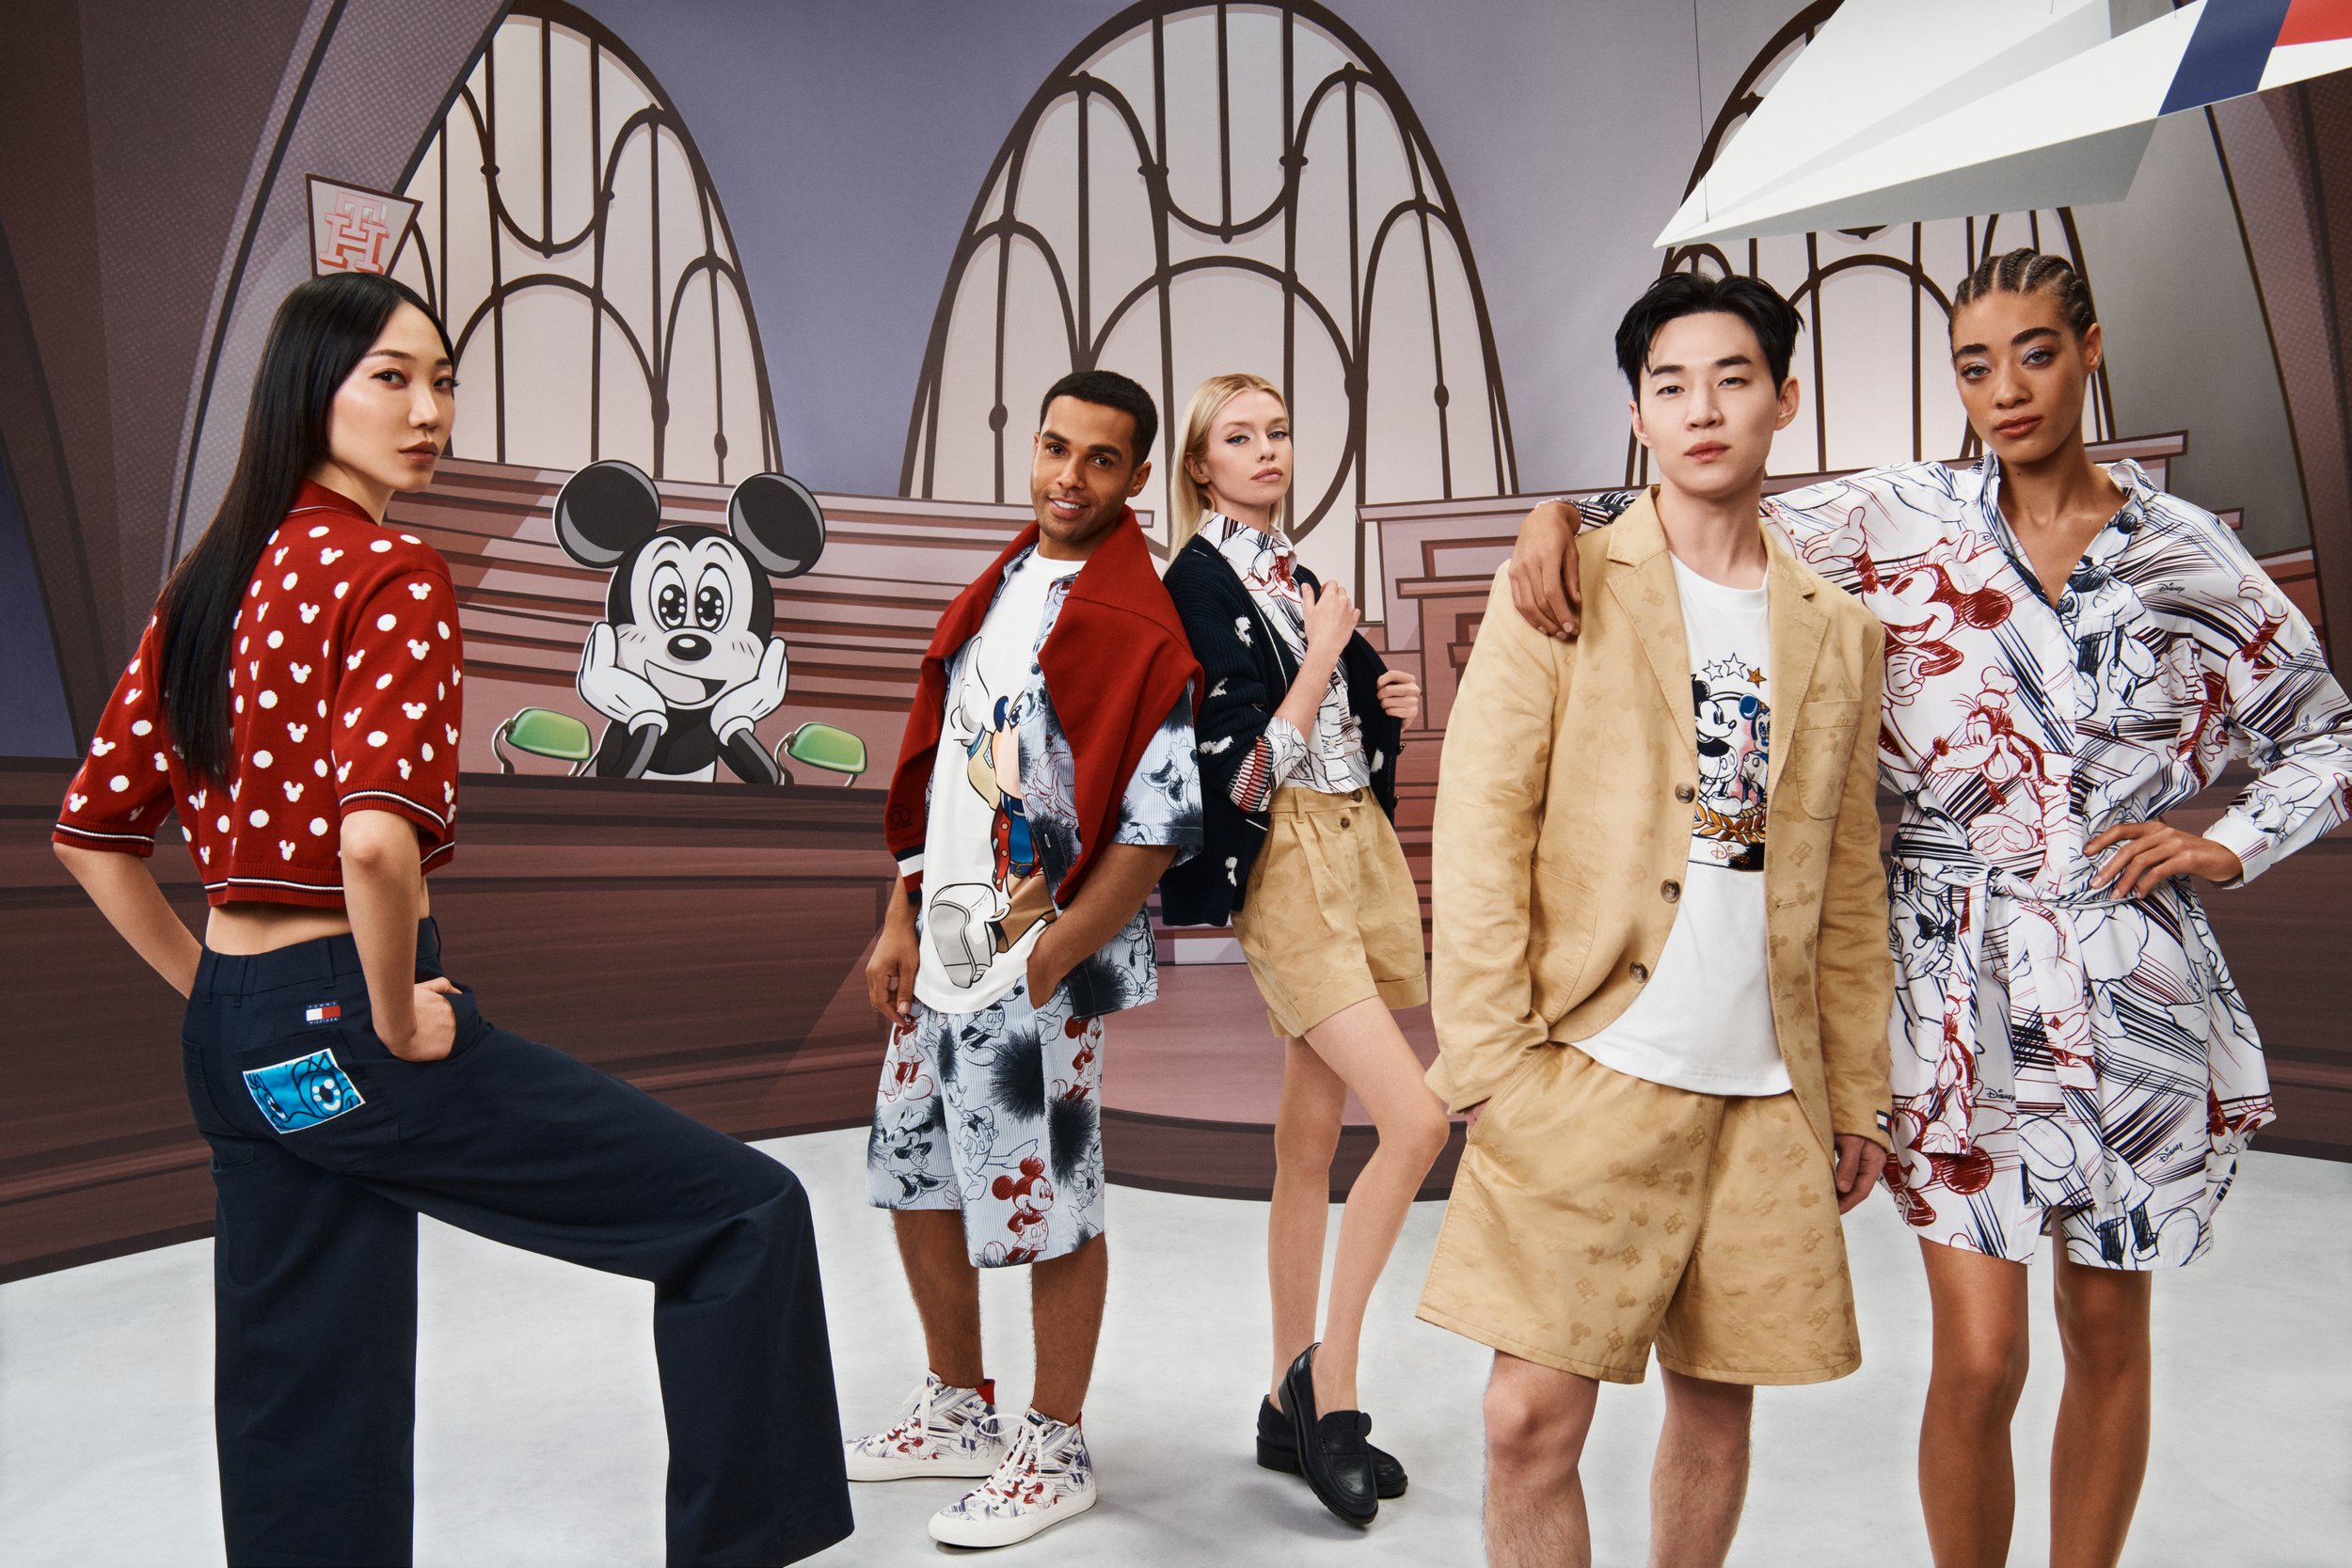 The Tommy Hilfiger x Disney collection